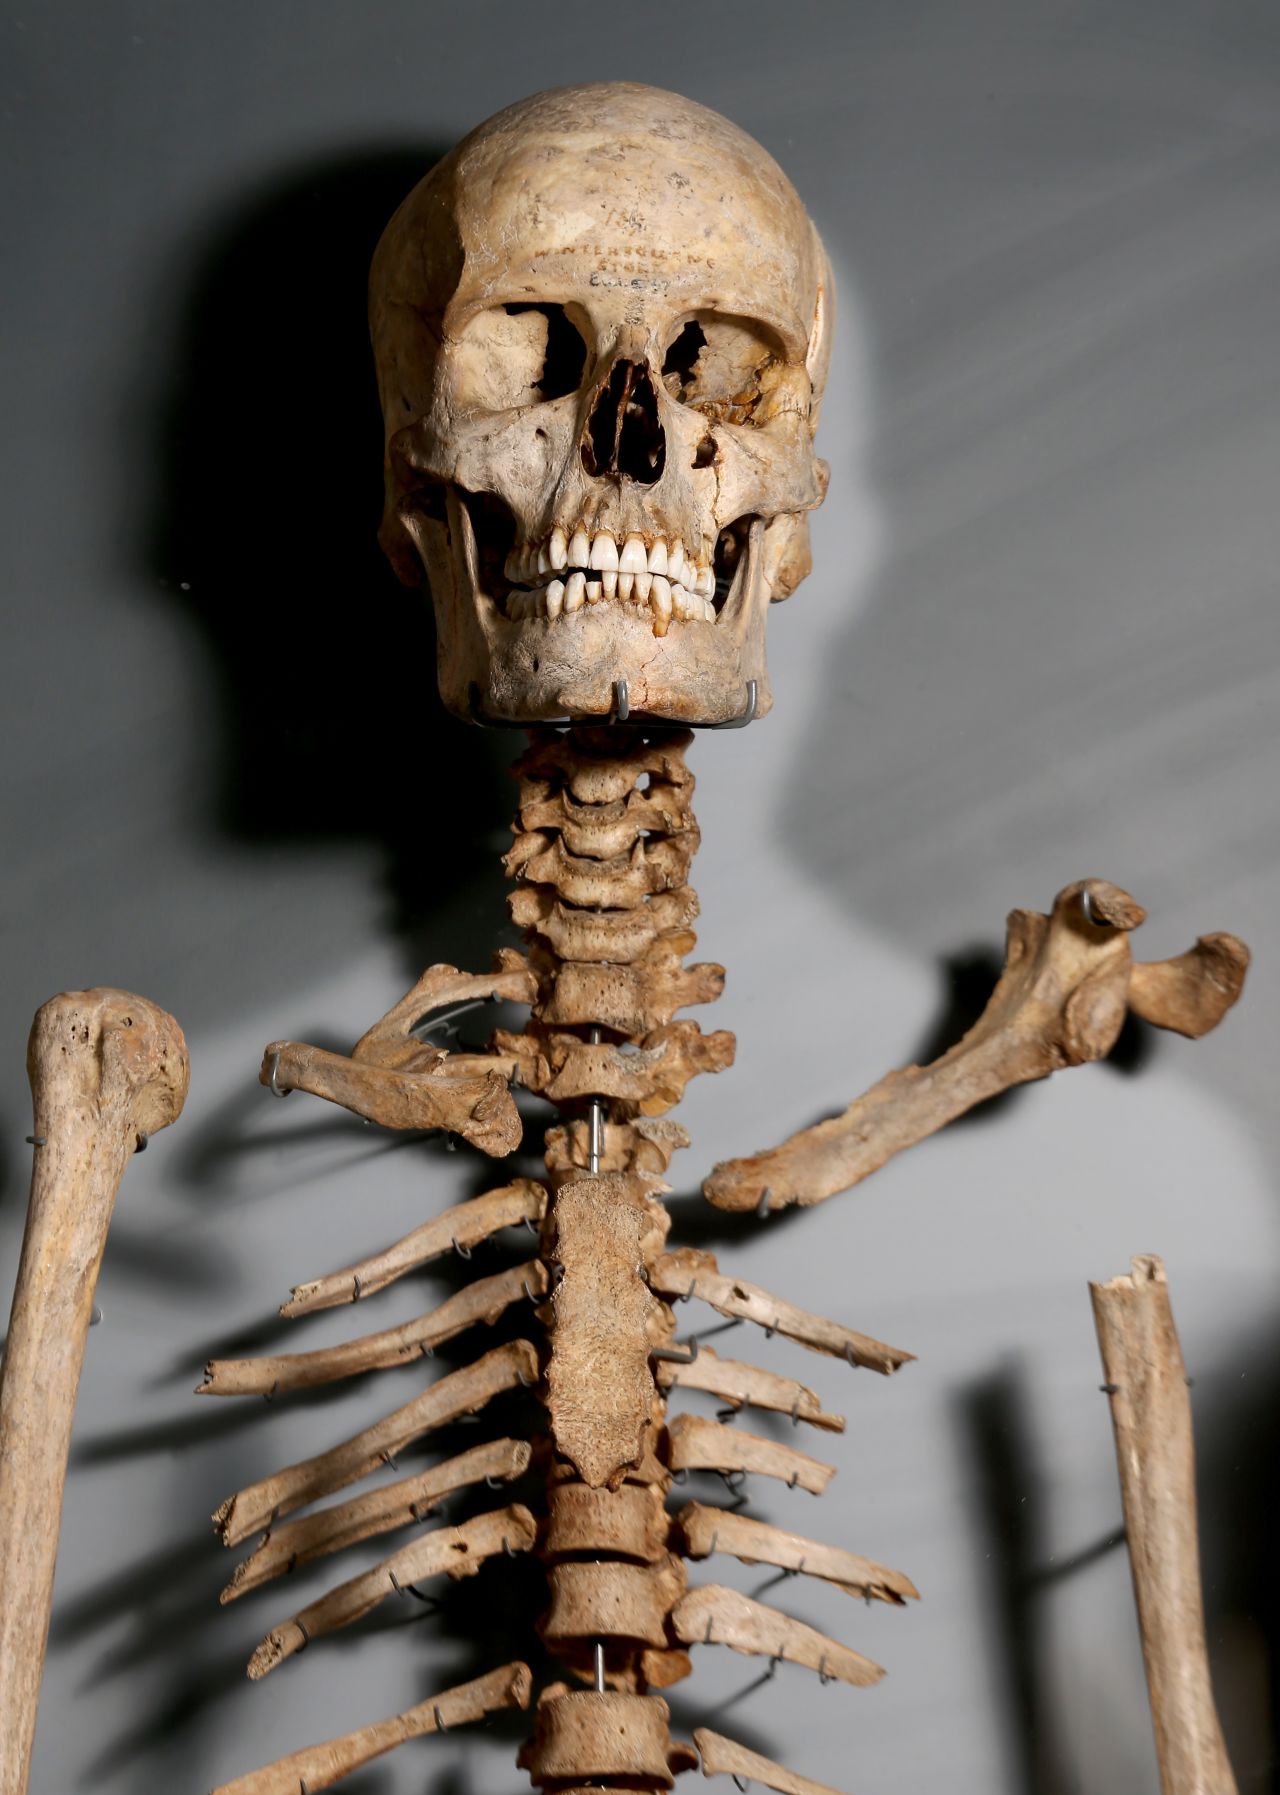 The ancient Briton's skeleton shows his age more clearly.